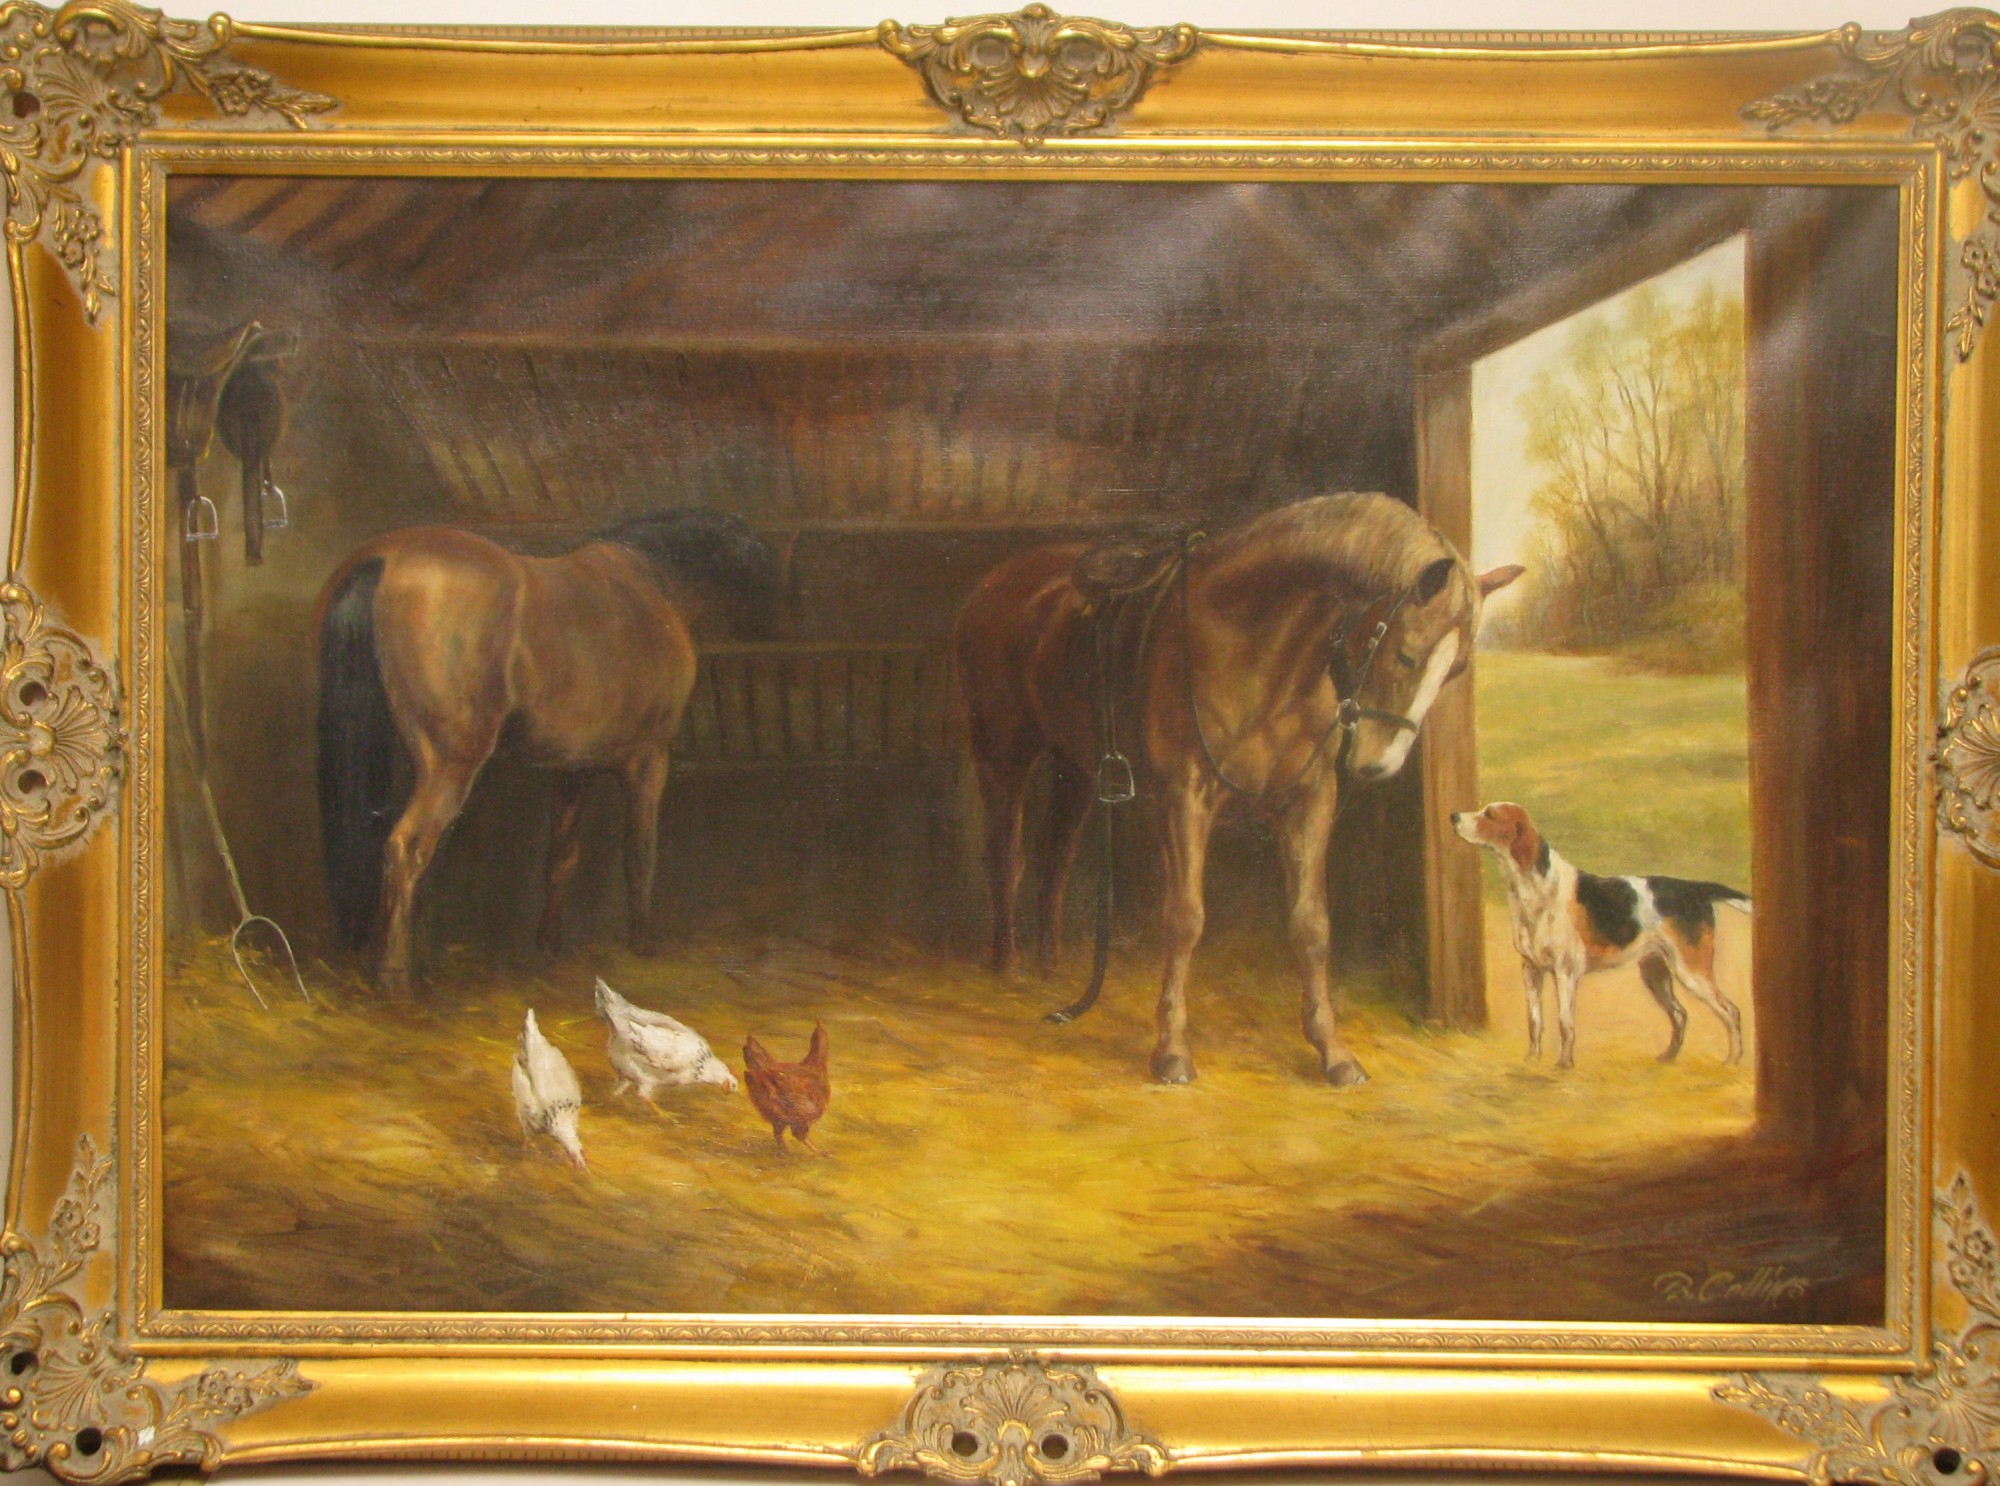 Benjamin Franklin Collins, Oil on Canvas depicting 2 horses, dog and chickens in stable, signed,